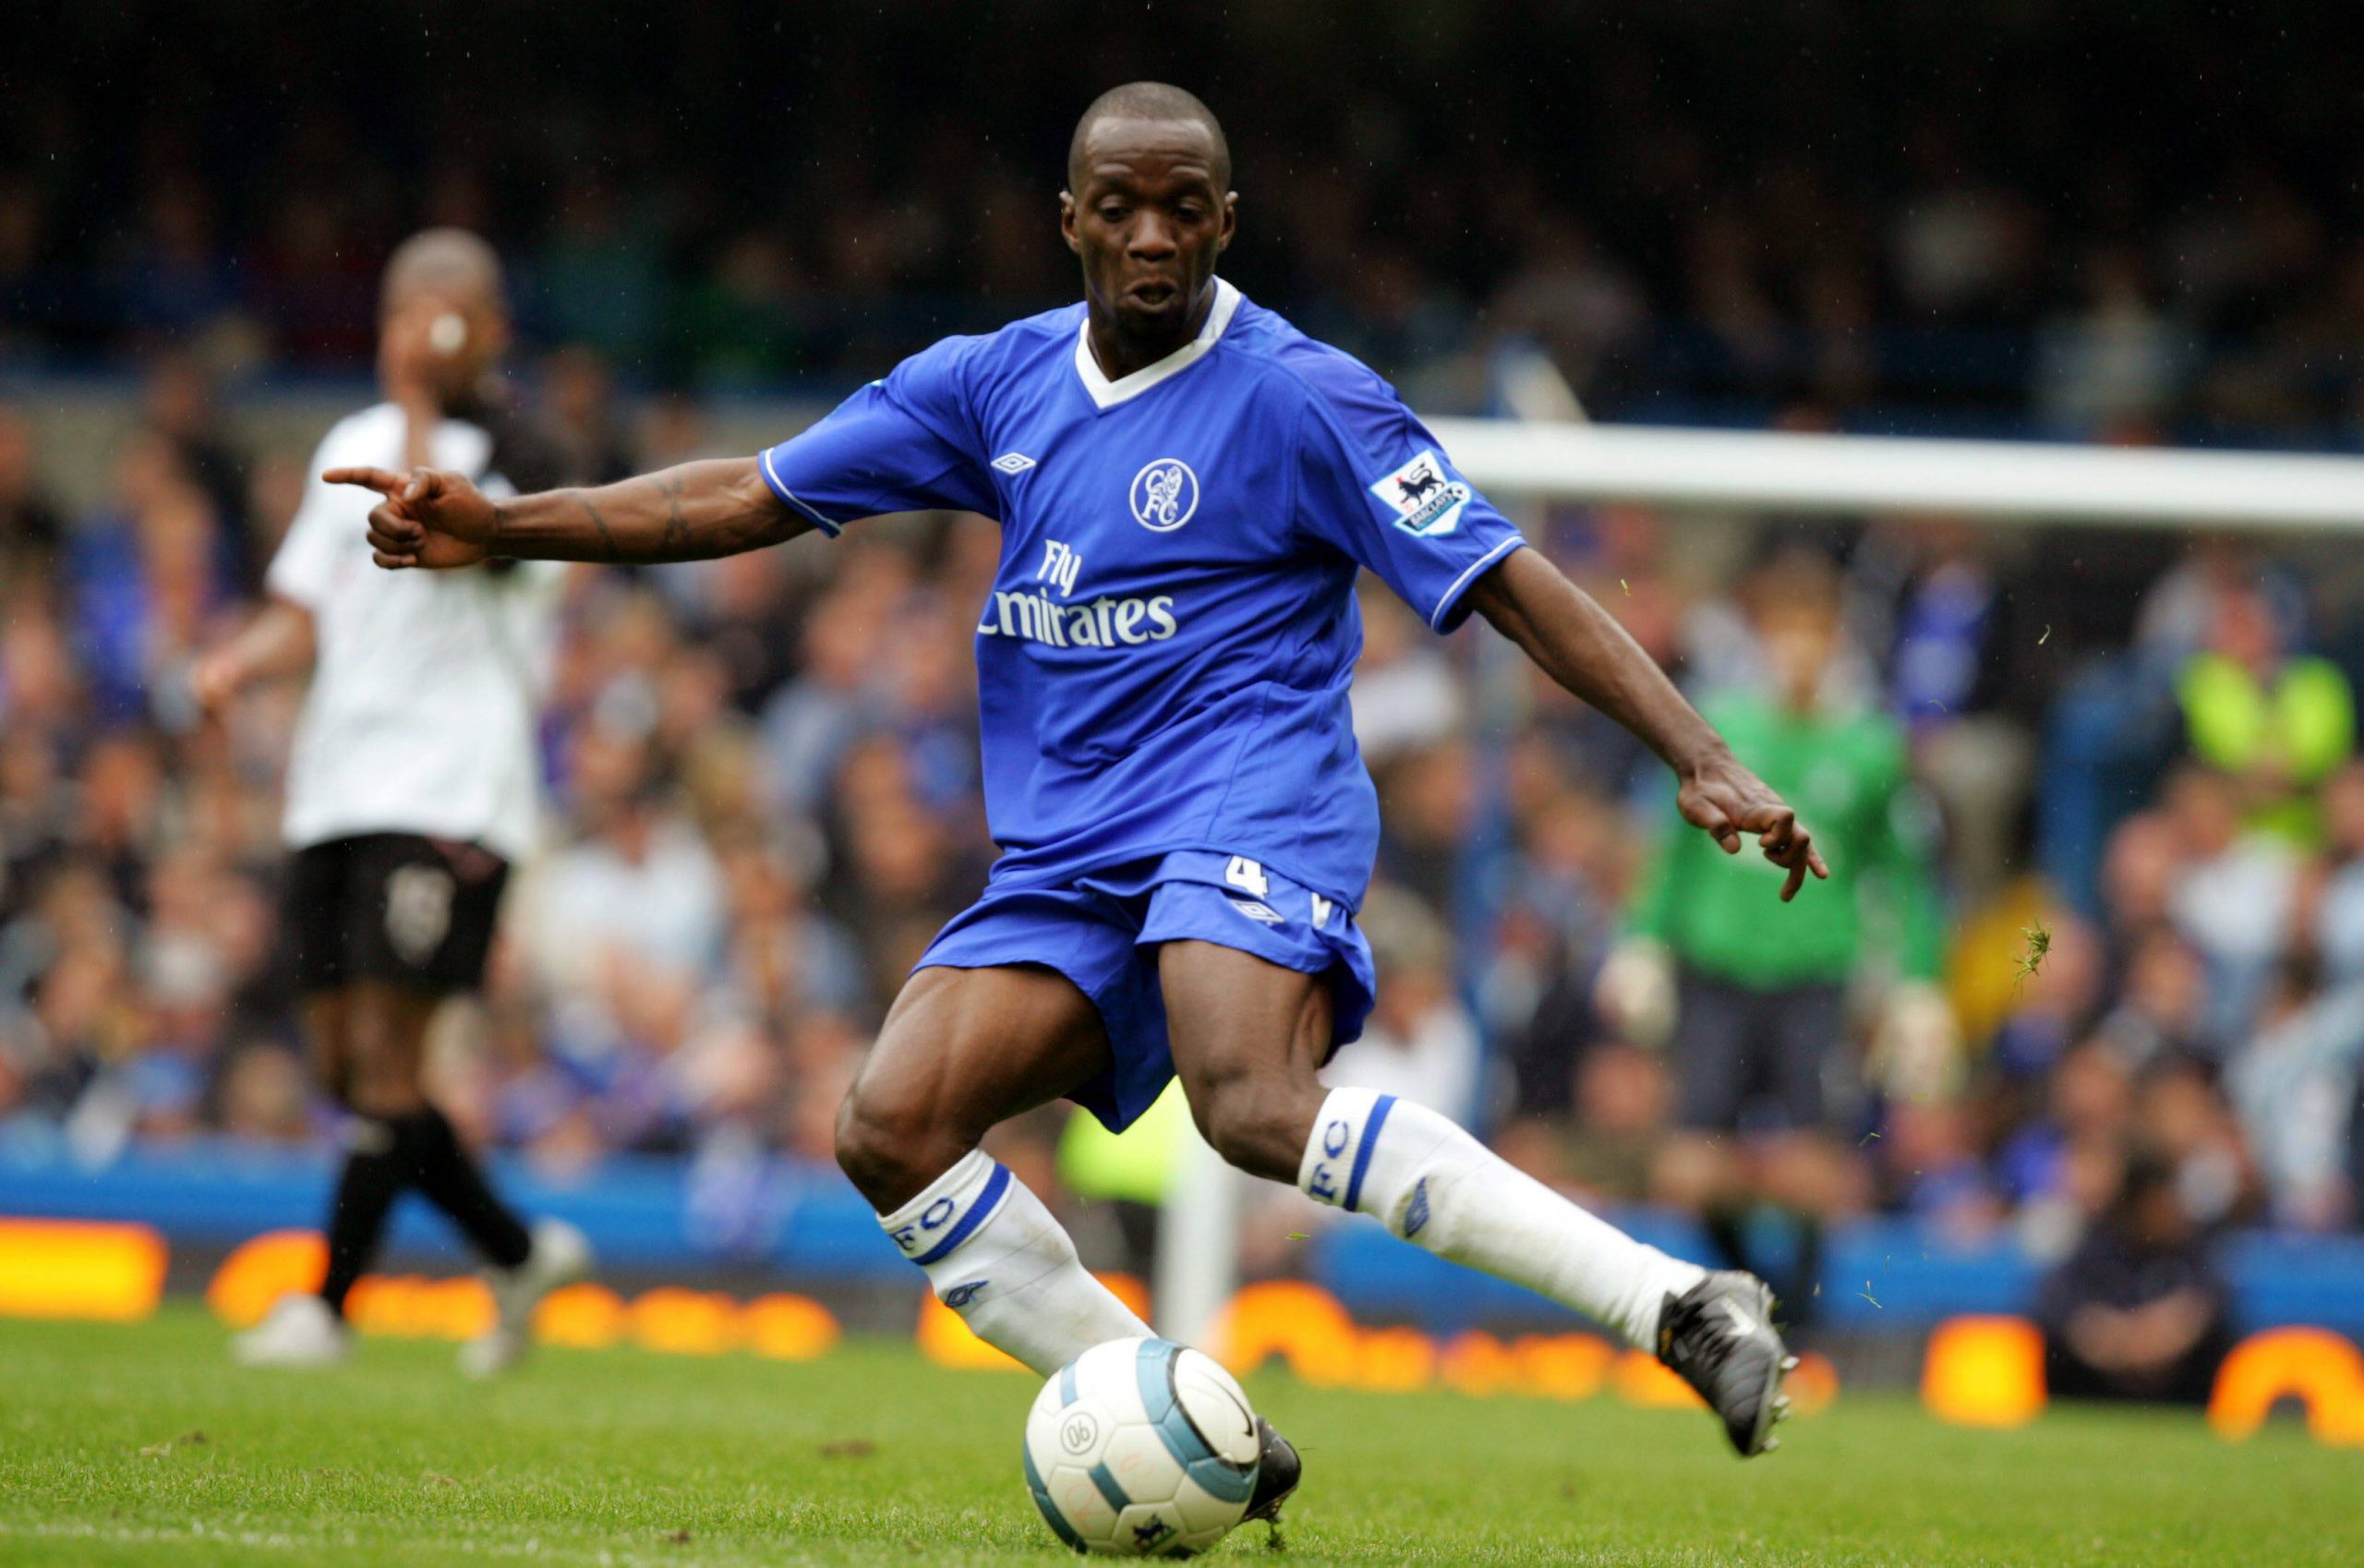 Claude Makelele has left his role as a mentor to young Chelsea players.